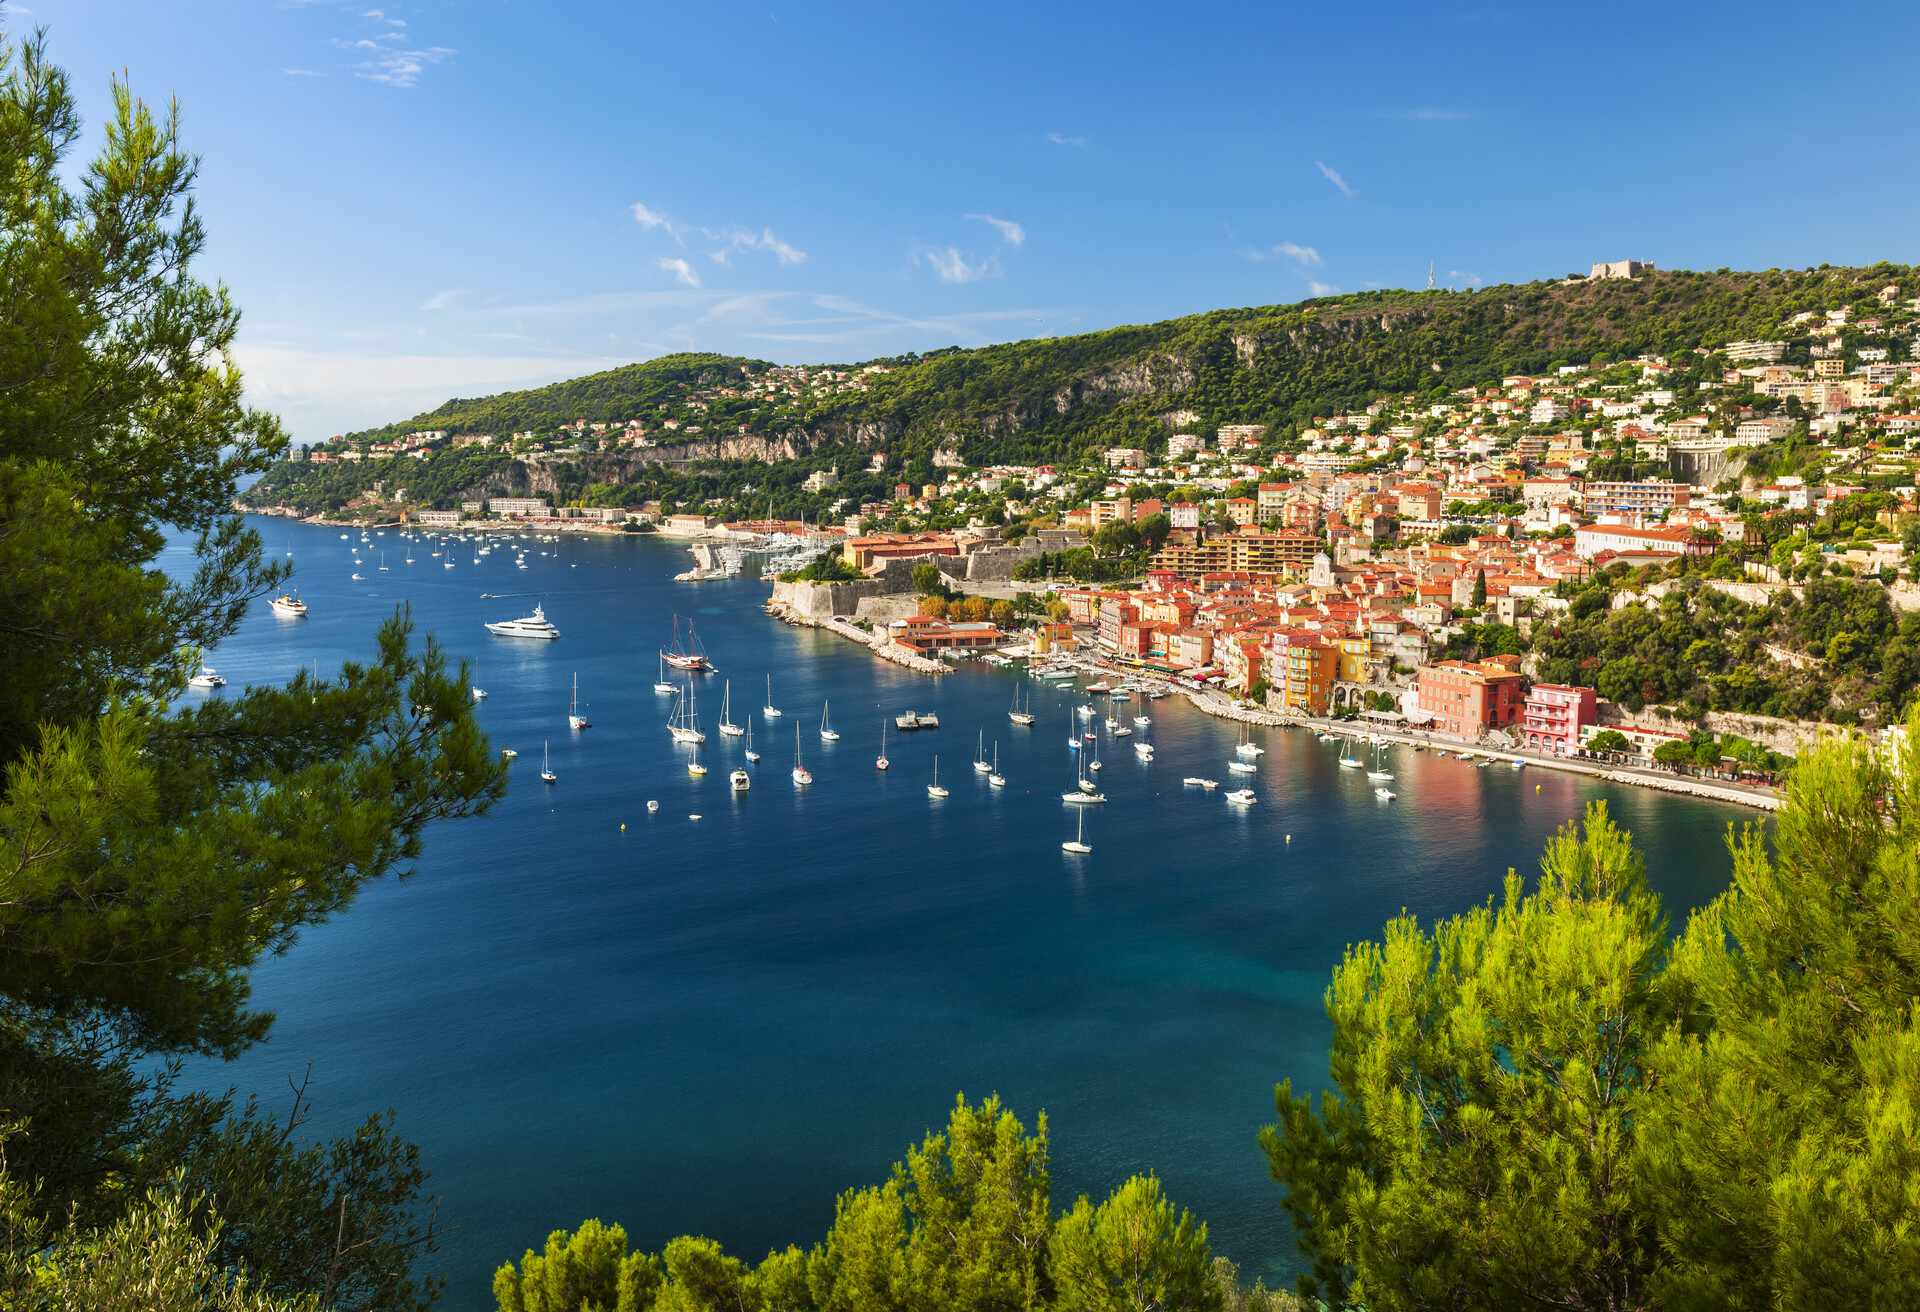 Aerial view of scenic French Riviera mediterranean coast with medieval coastal town Villefranche-sur-Mer, Cap de Nice and leisure boats anchored in harbor; Shutterstock ID 298640480